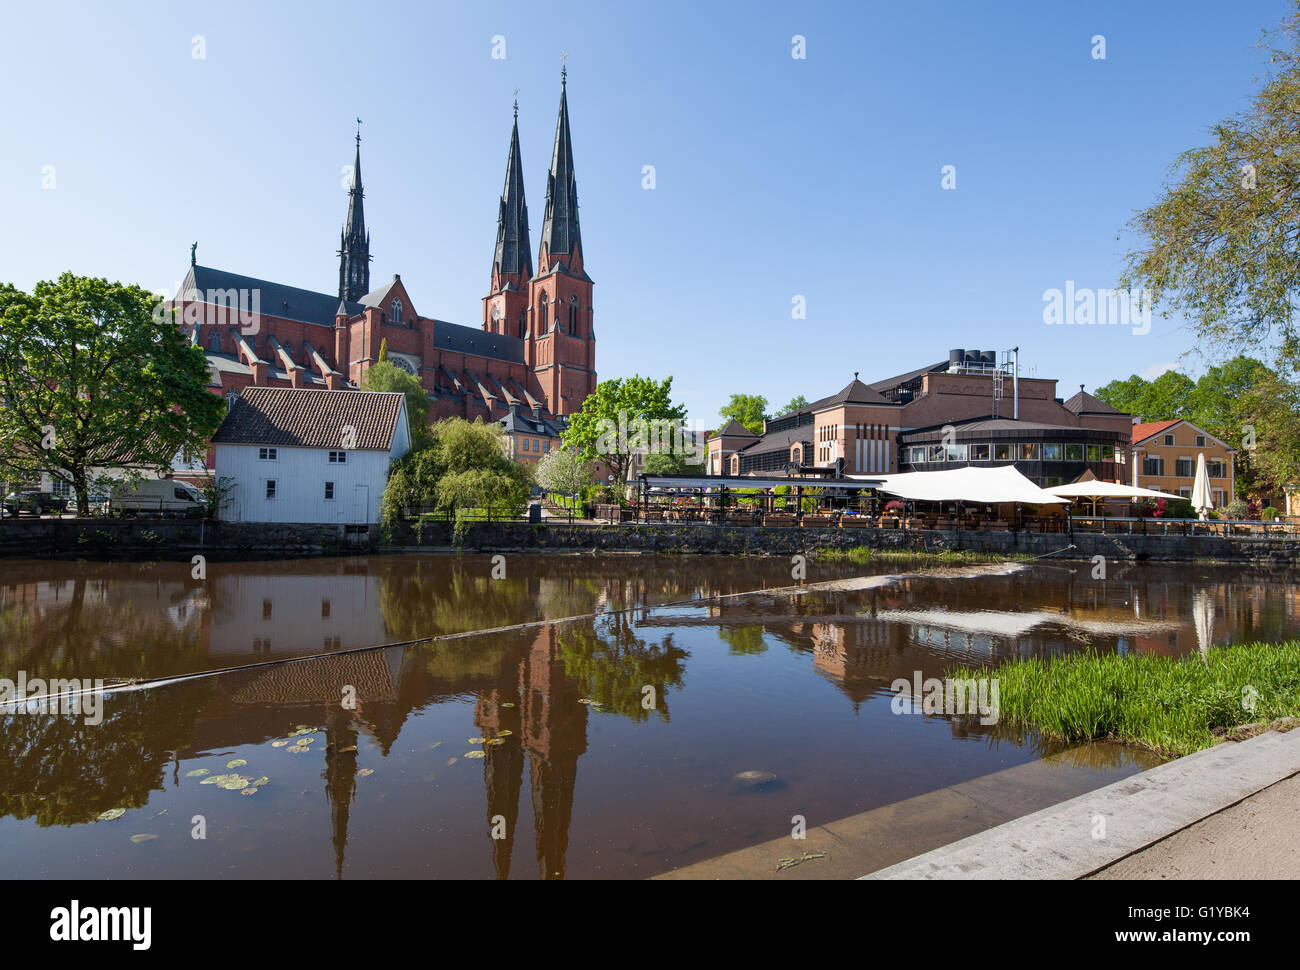 Uppsala, Sweden - May 20, 2016 : Uppsala Church with its reflection on the river. Stock Photo